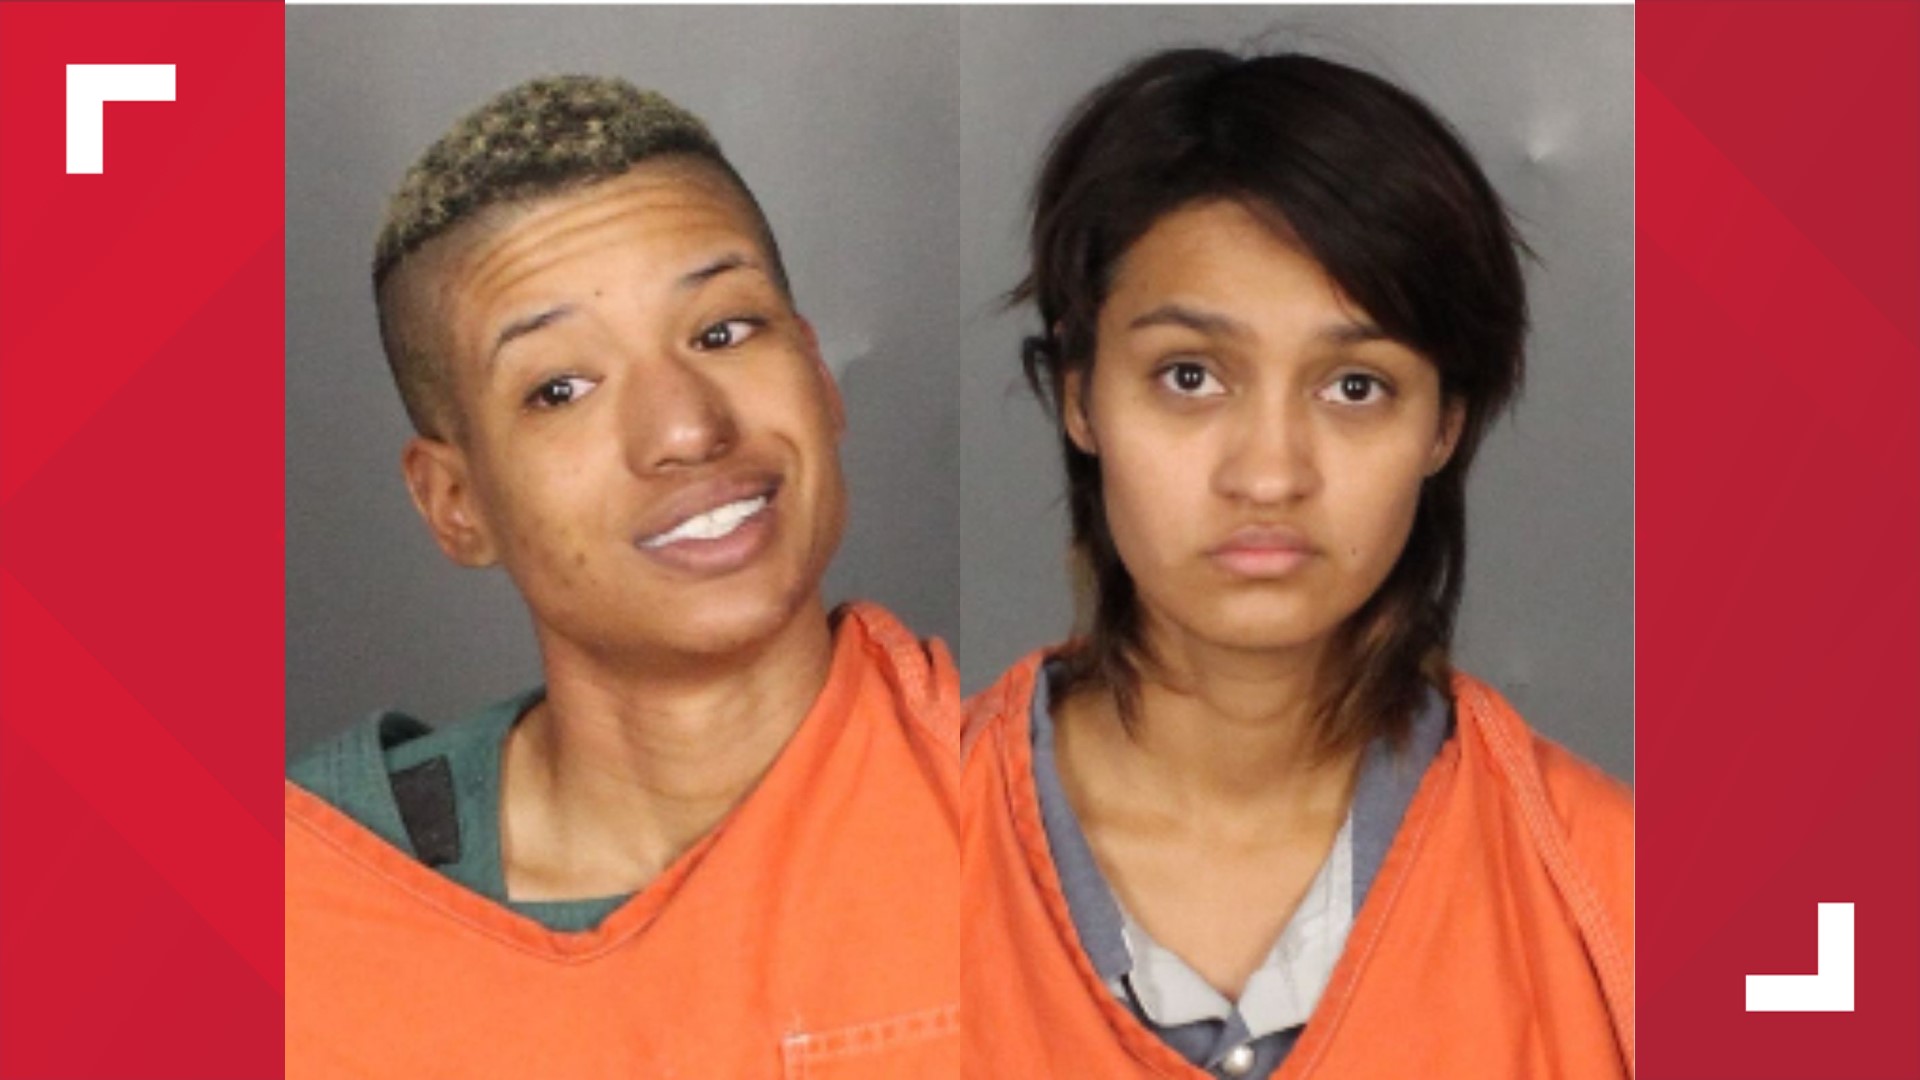 A traffic stop in McLennan County Sunday night led to the arrest of two women who may be connected to the deaths of an elderly man and woman in Plano.